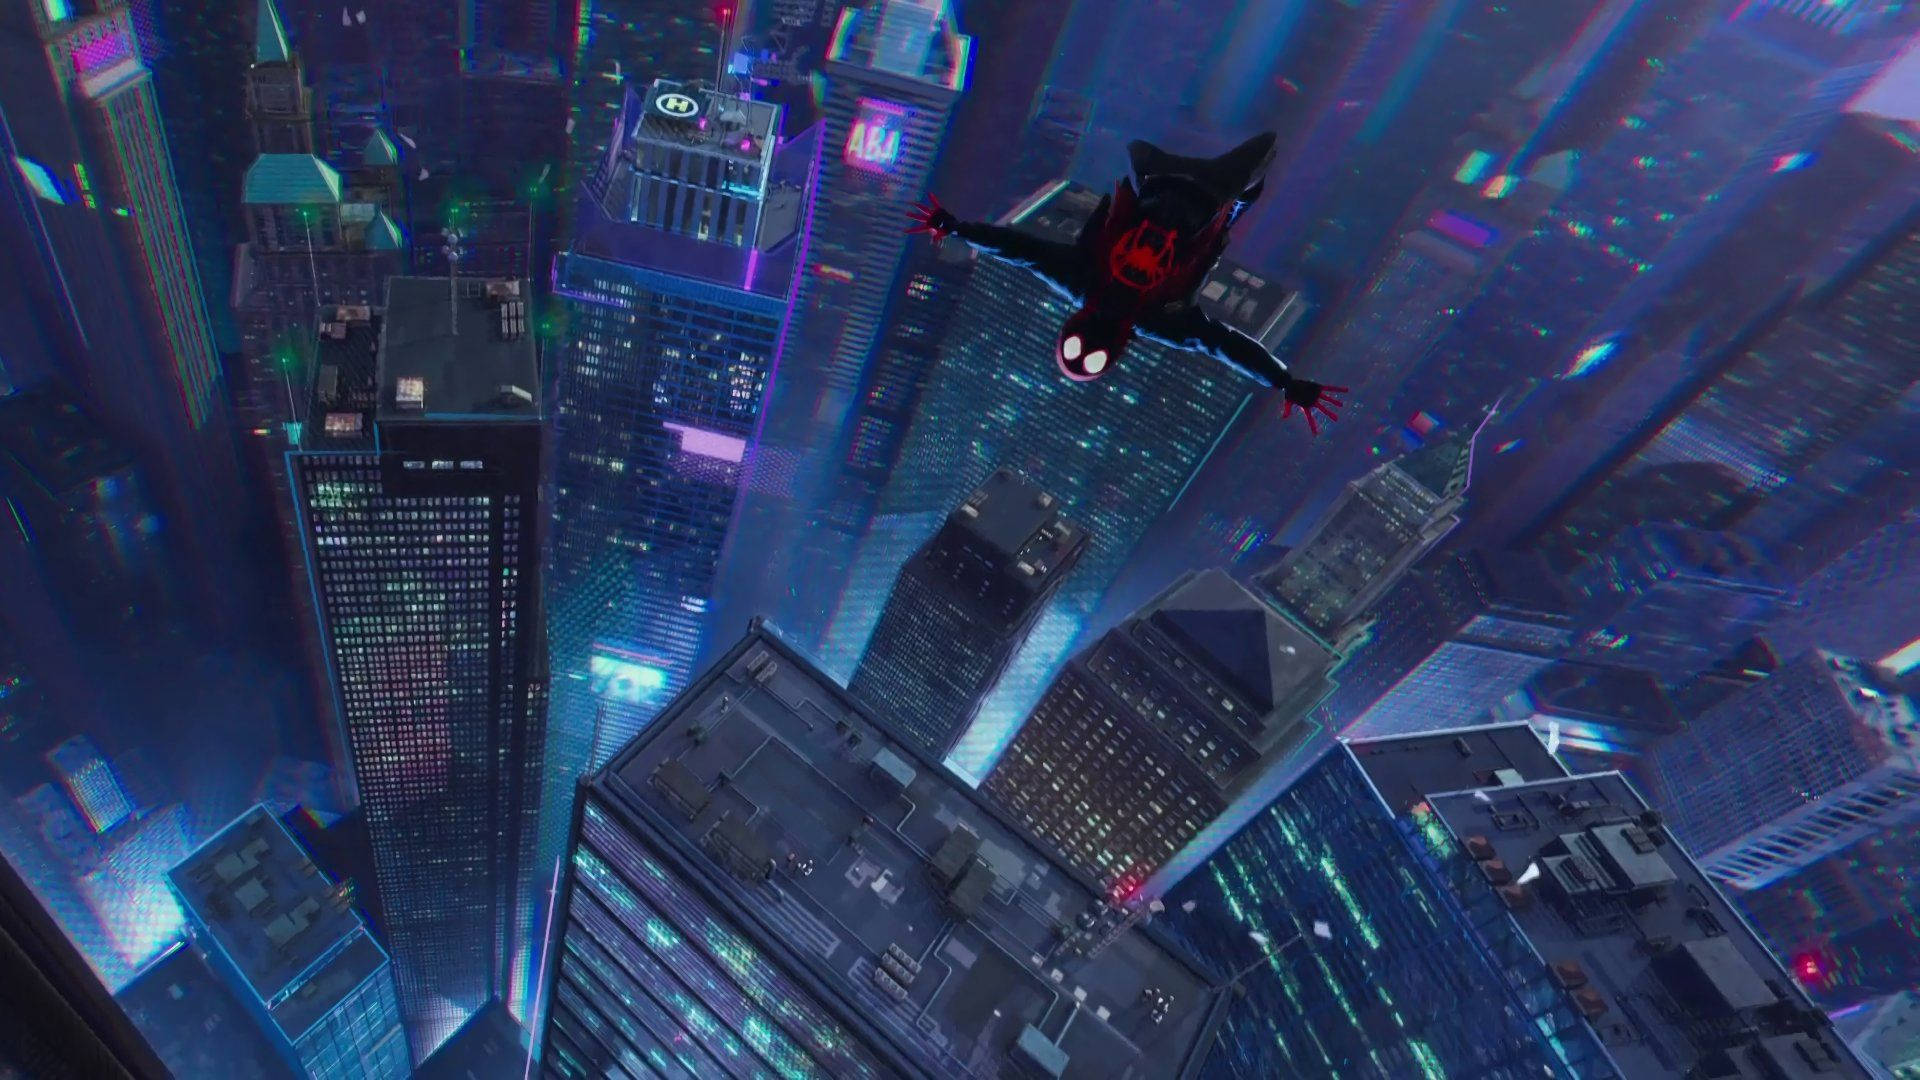 Making a daring entrance - Spiderman takes to the sky in Spider Verse Wallpaper